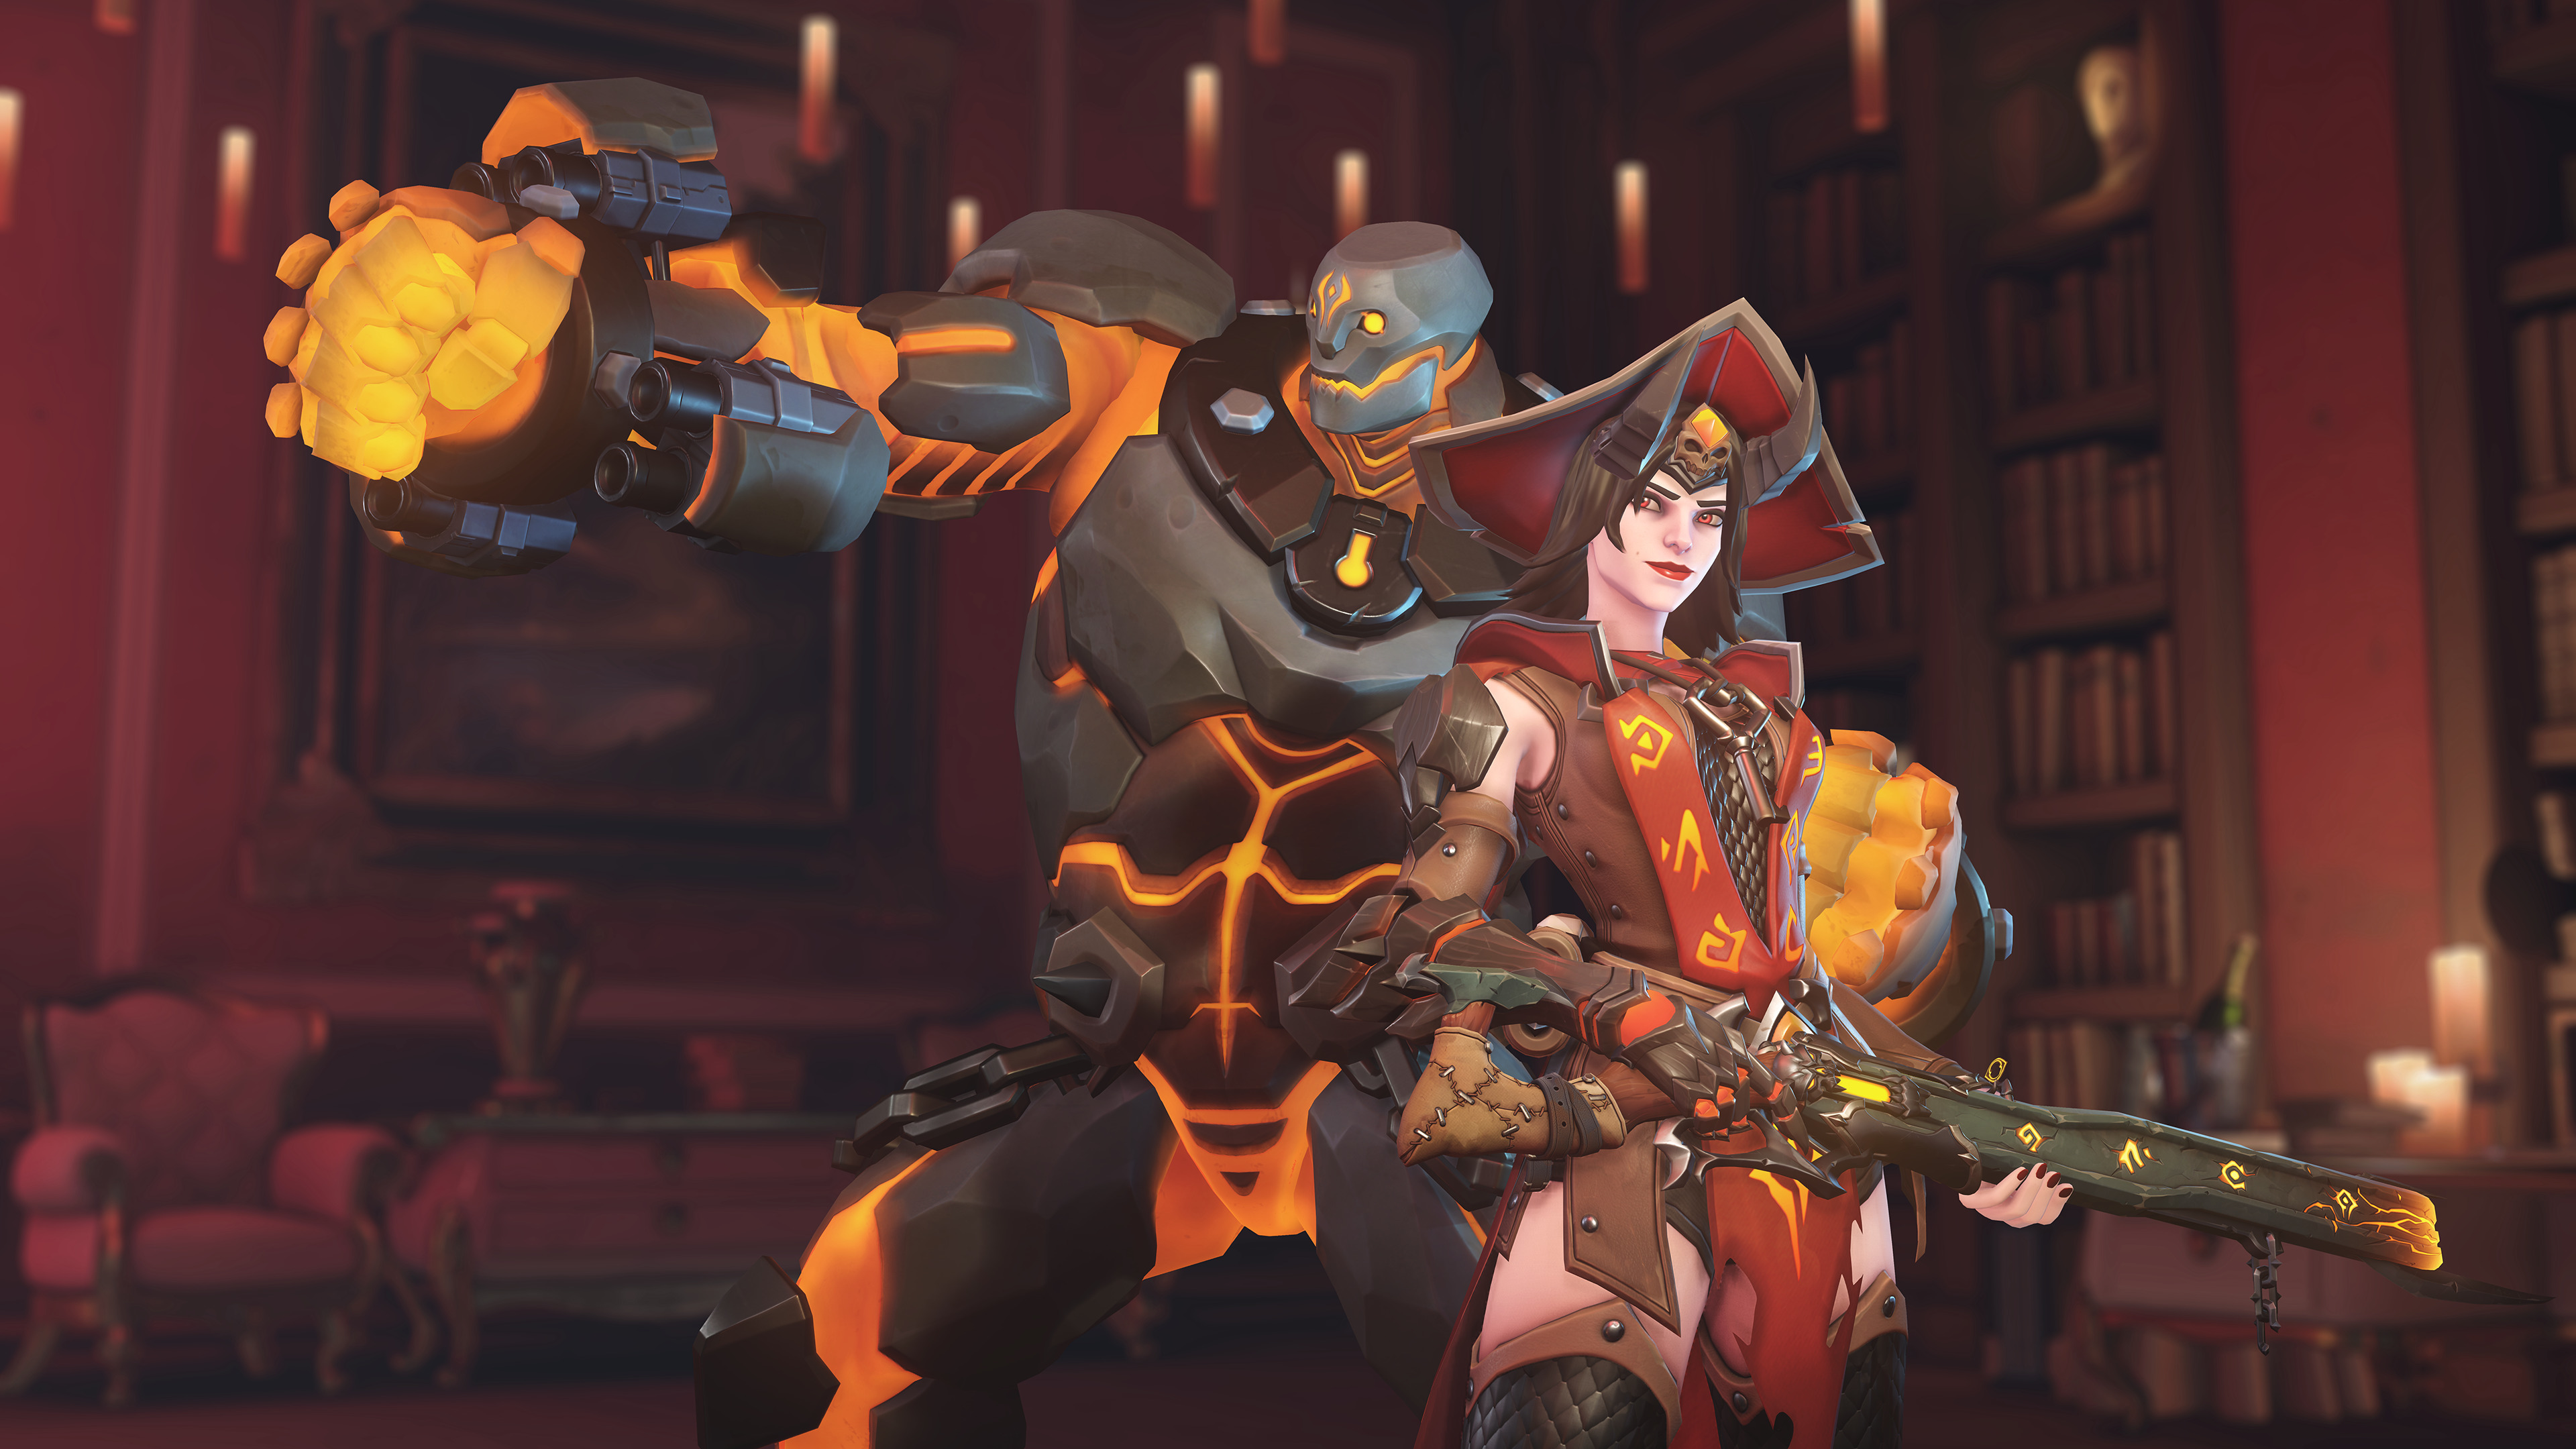 Video Game Overwatch Ashe Hd Wallpaper Background Image - Ashe Halloween Skin Overwatch , HD Wallpaper & Backgrounds